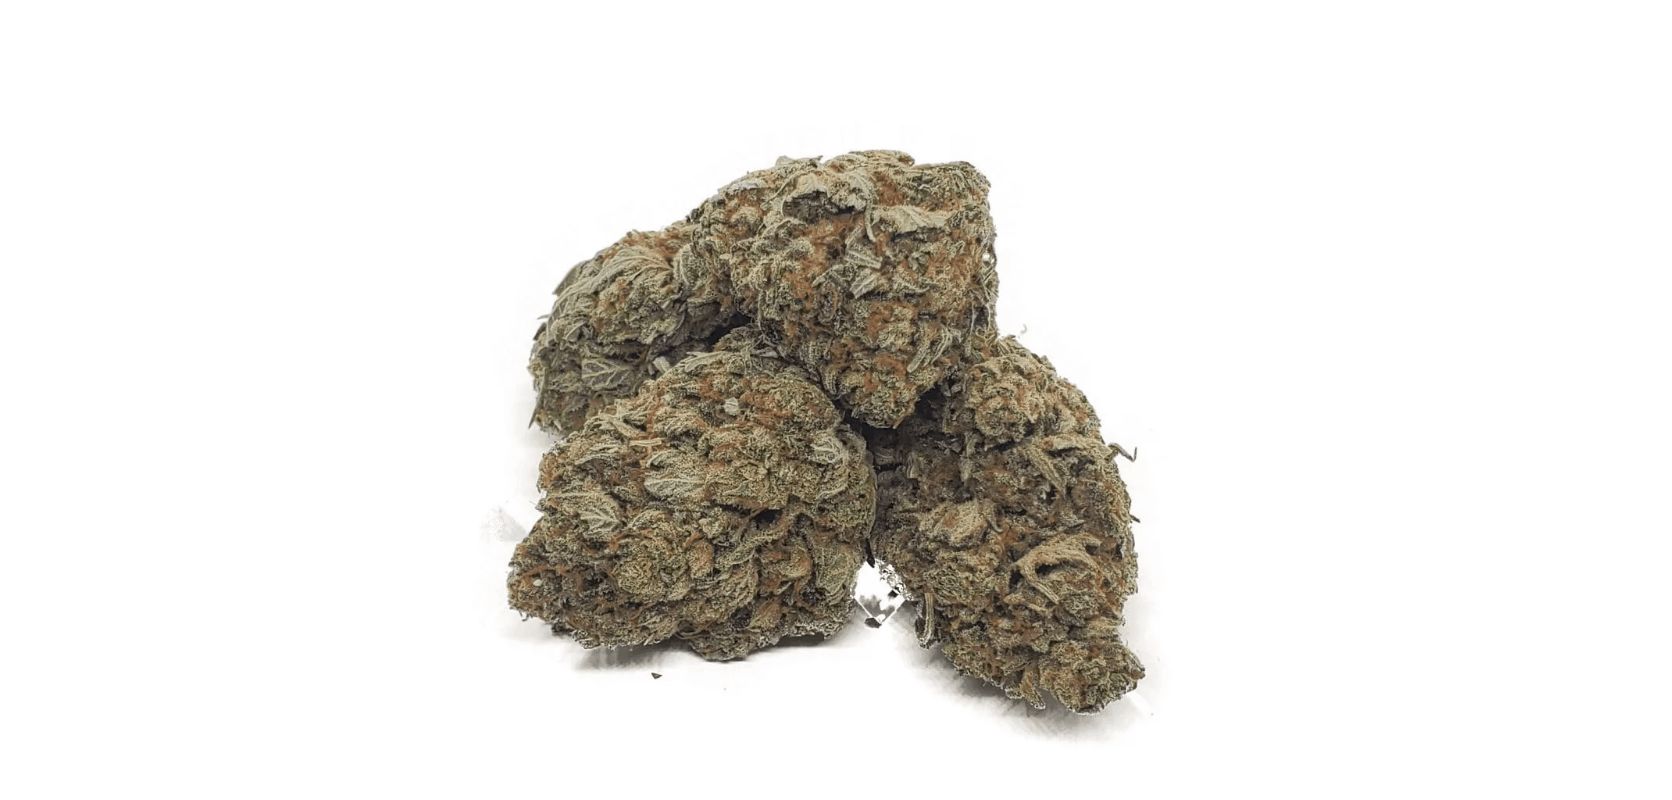 Cali Bubba weed is a potent Indica hybrid strain that has captured the heart of canna enthusiasts, especially in Canada. 